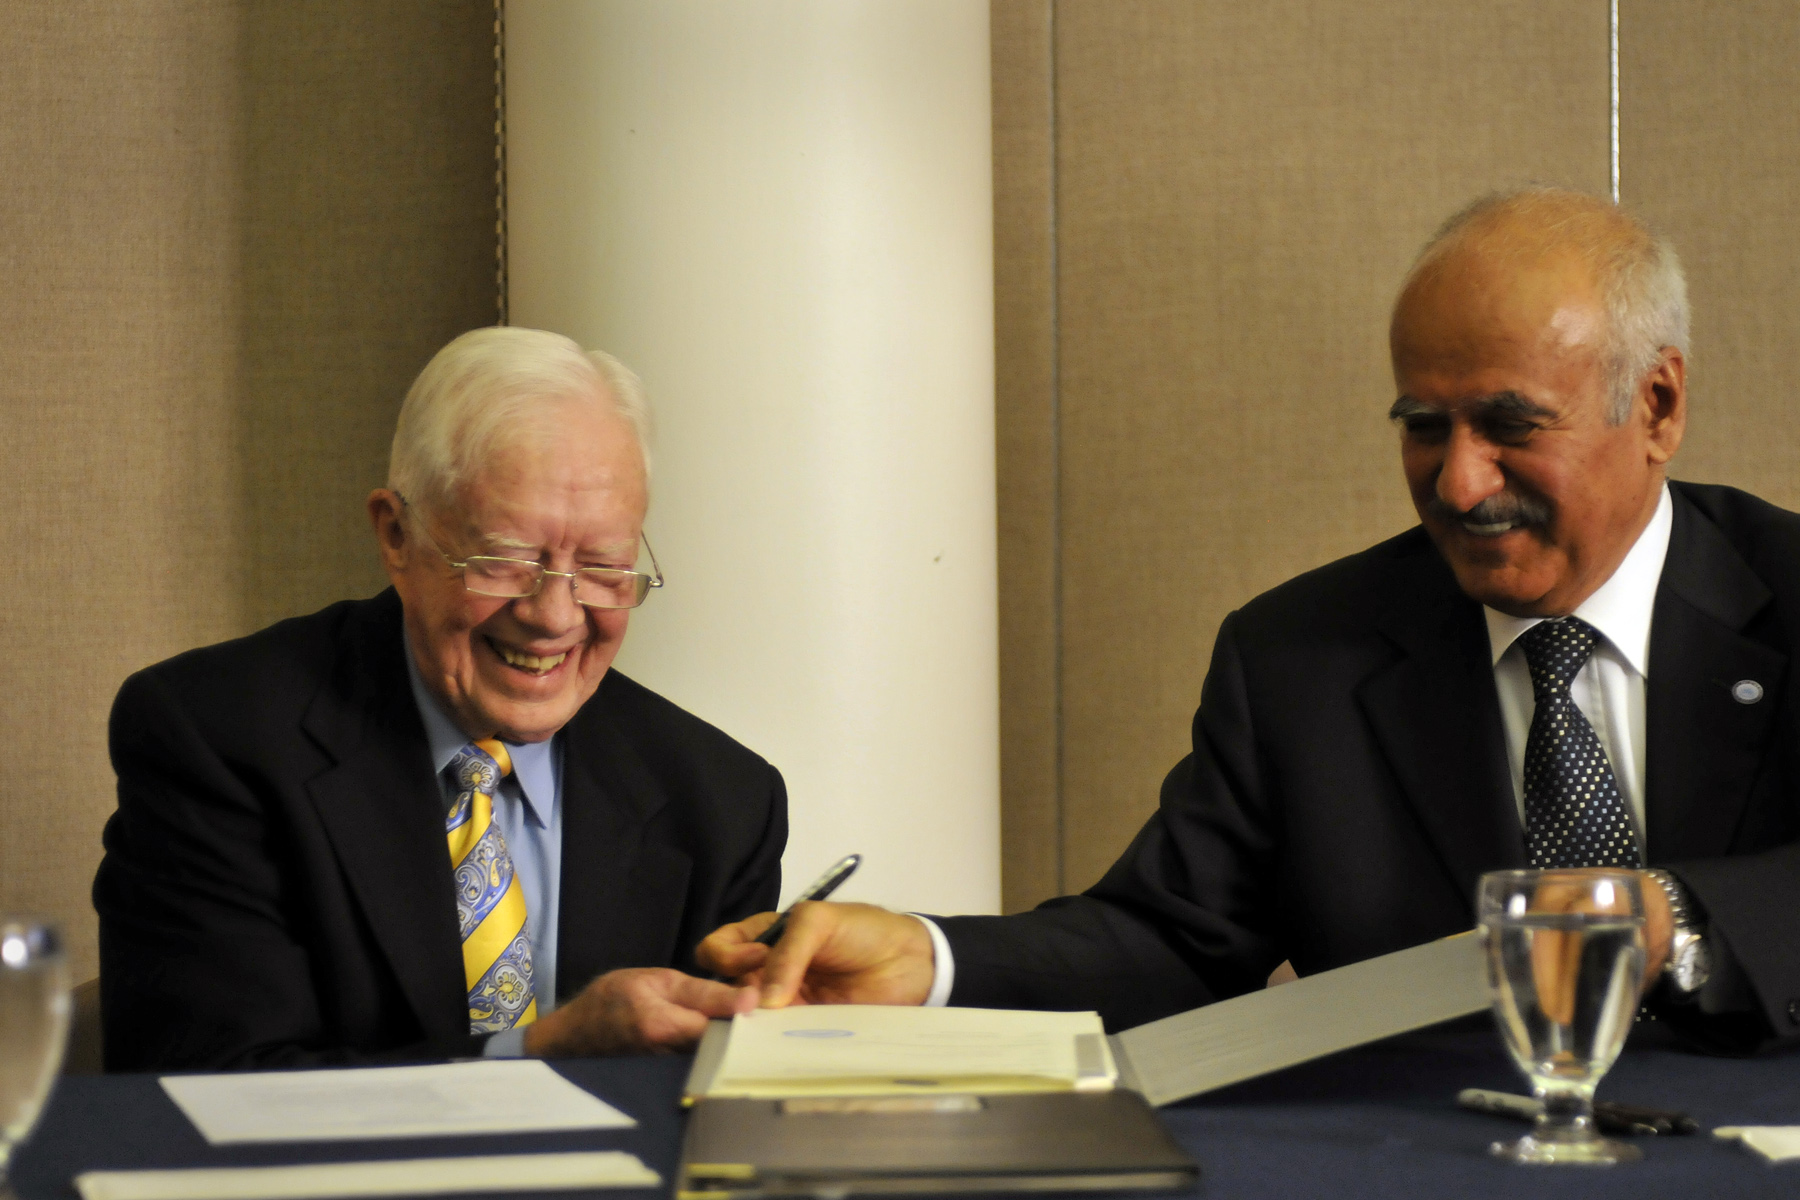 Suleiman Jasir Al-Herbish (right) and Jimmy Carter sign agreement.